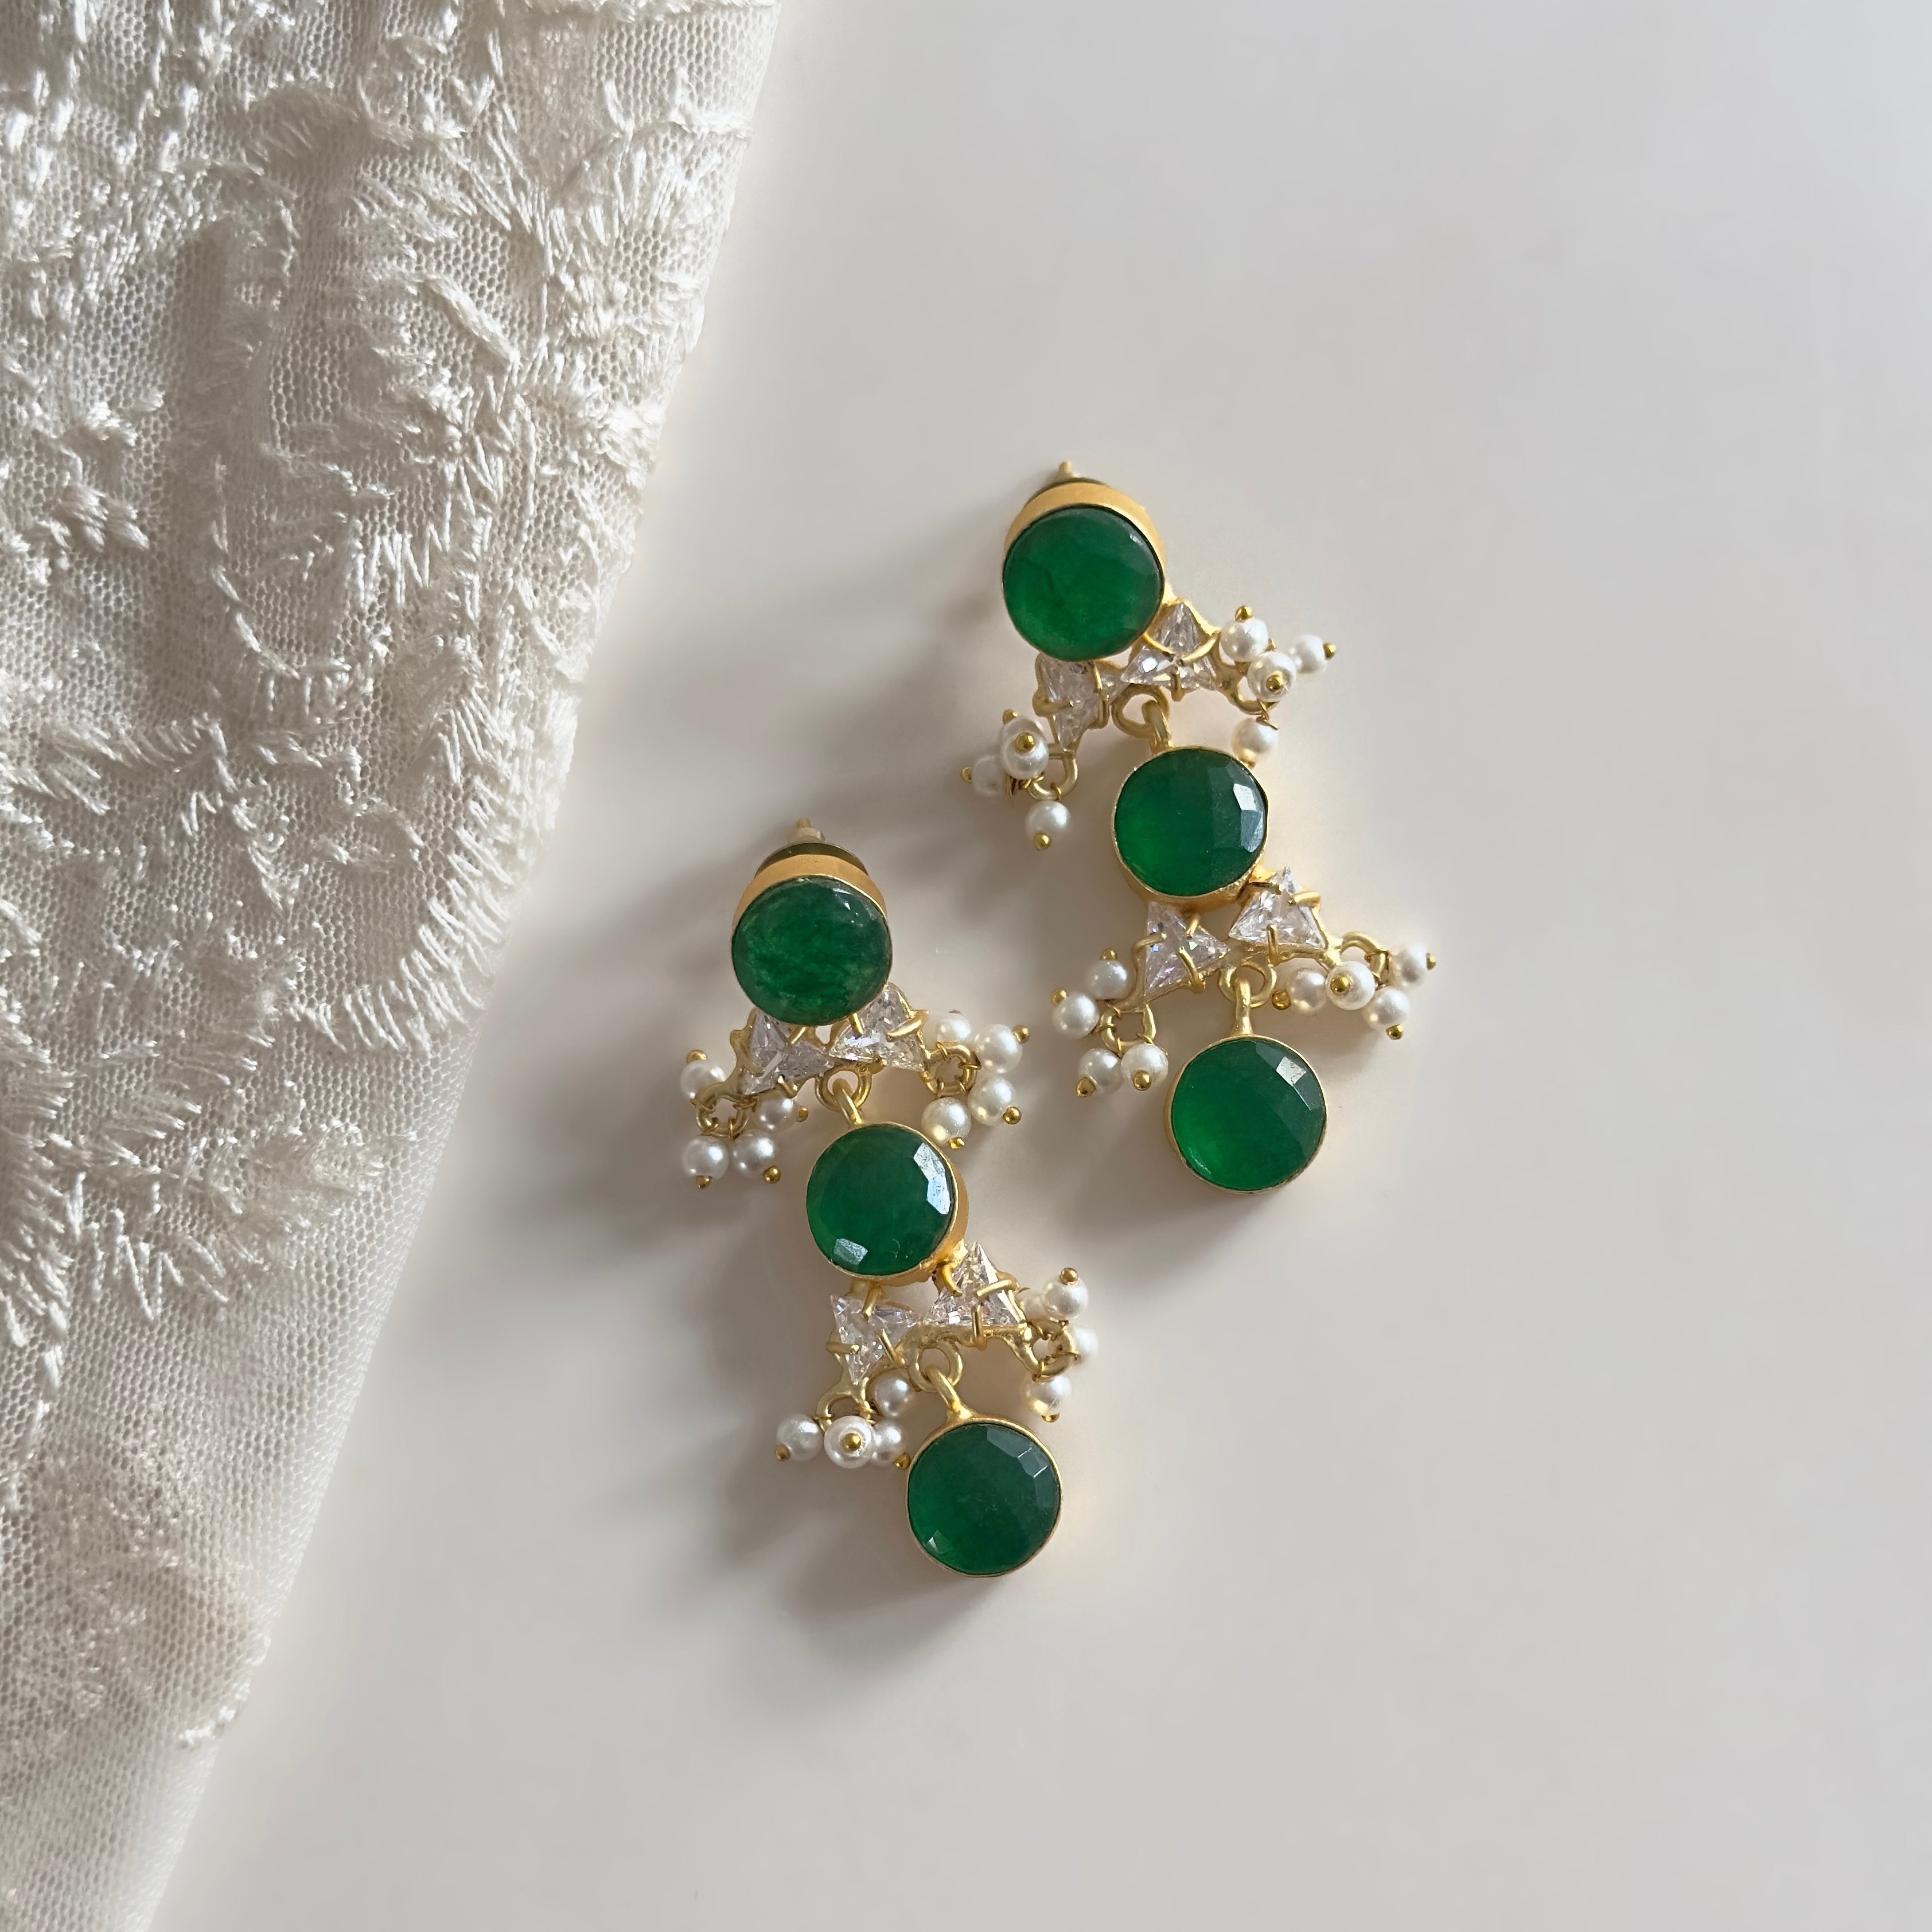 Elevate your look with these Green Crystal Drop Earrings, adorned with sparkling cz crystals and stunning green stones. Add a touch of sophistication and elegance to any ensemble.